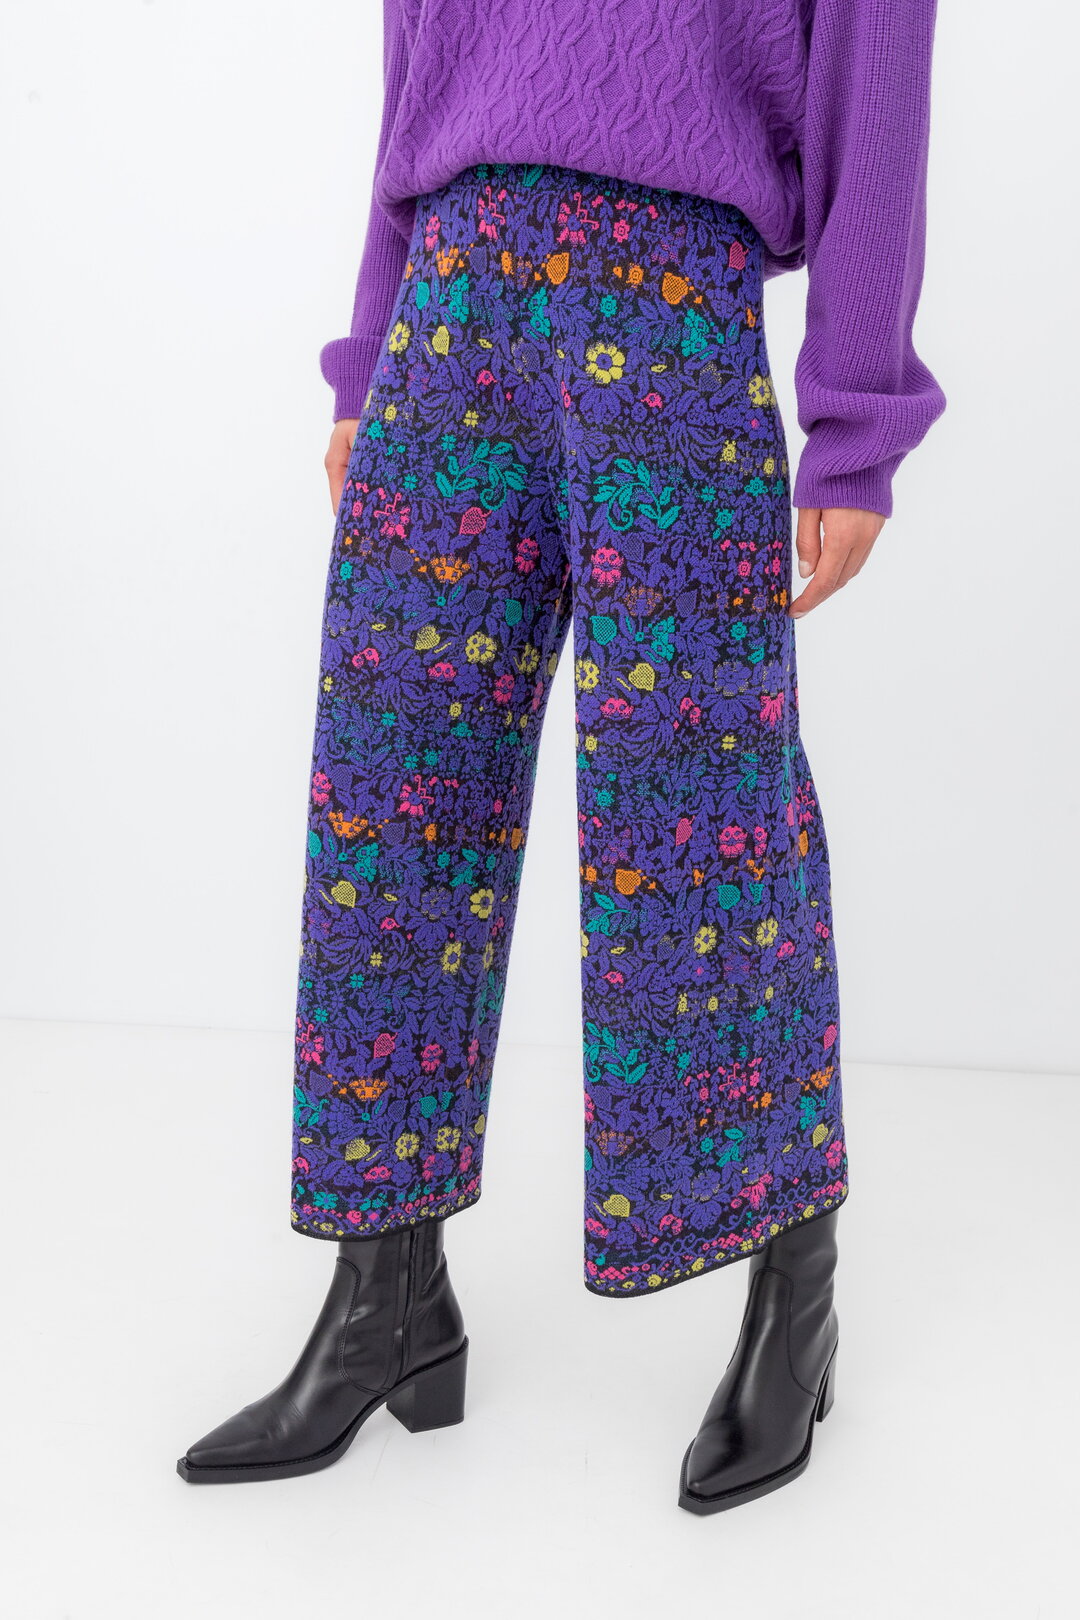 IVKO's Knitted Pants in black, bright multicoloured pattern